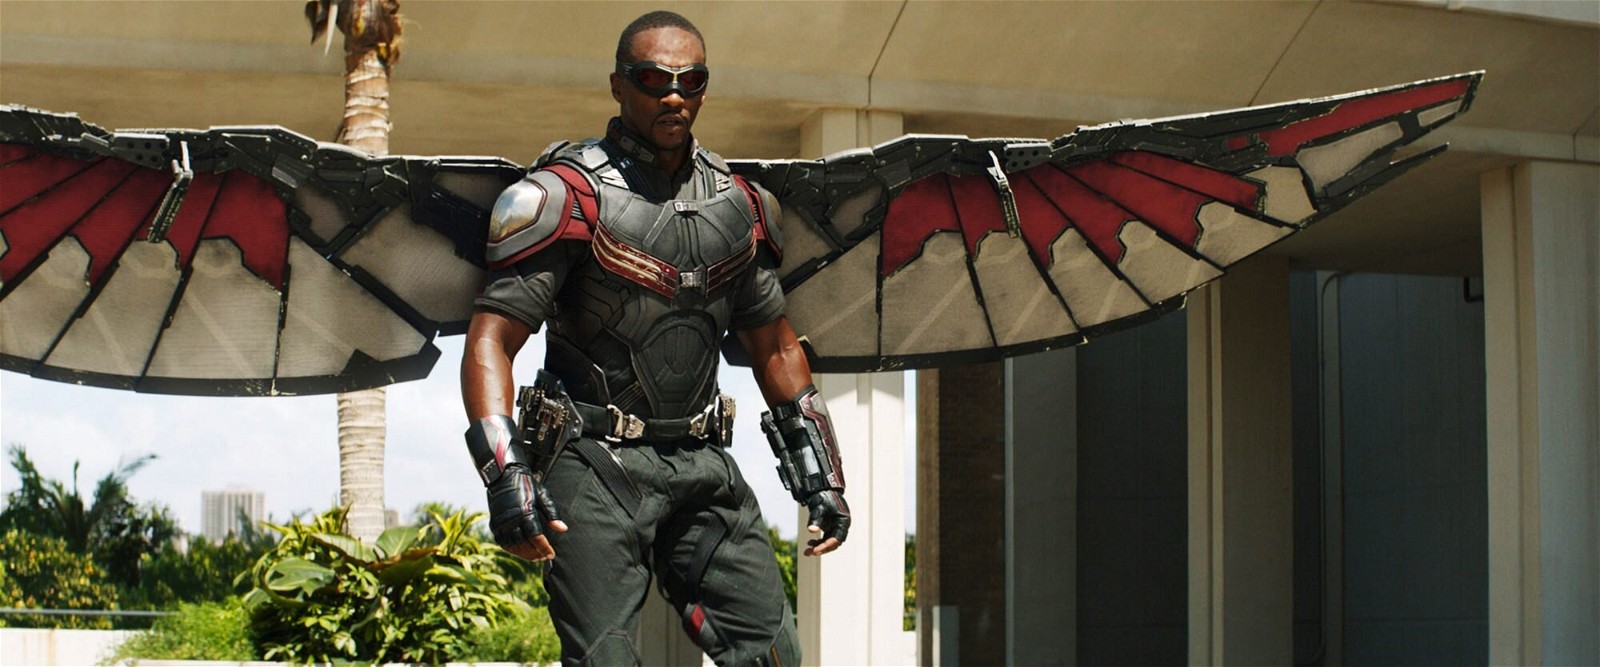 Anthony Mackie as Falcon in the MCU.